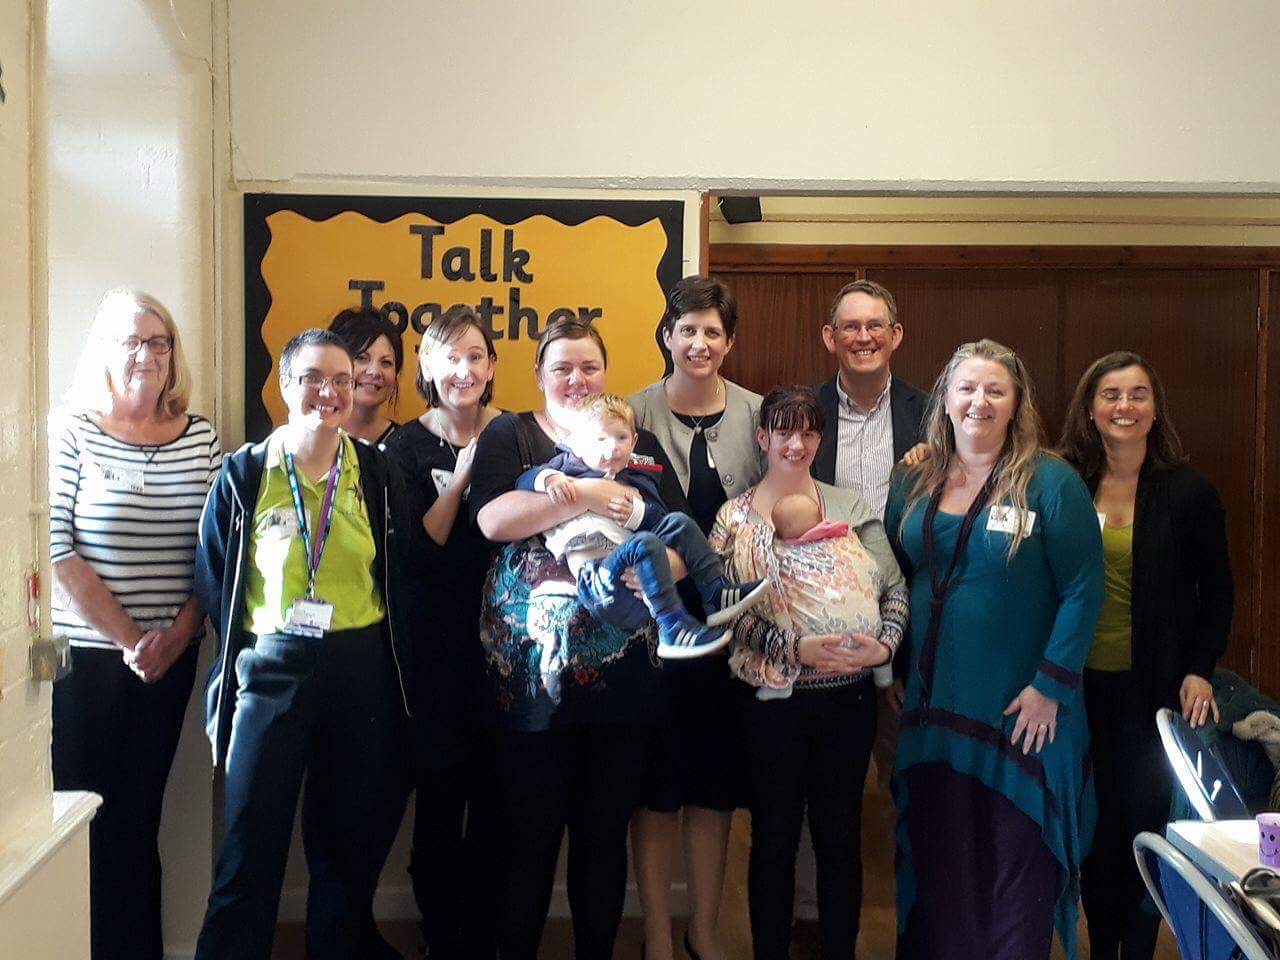 MP to visit Blackpool to highlight cuts to breastfeeding support services